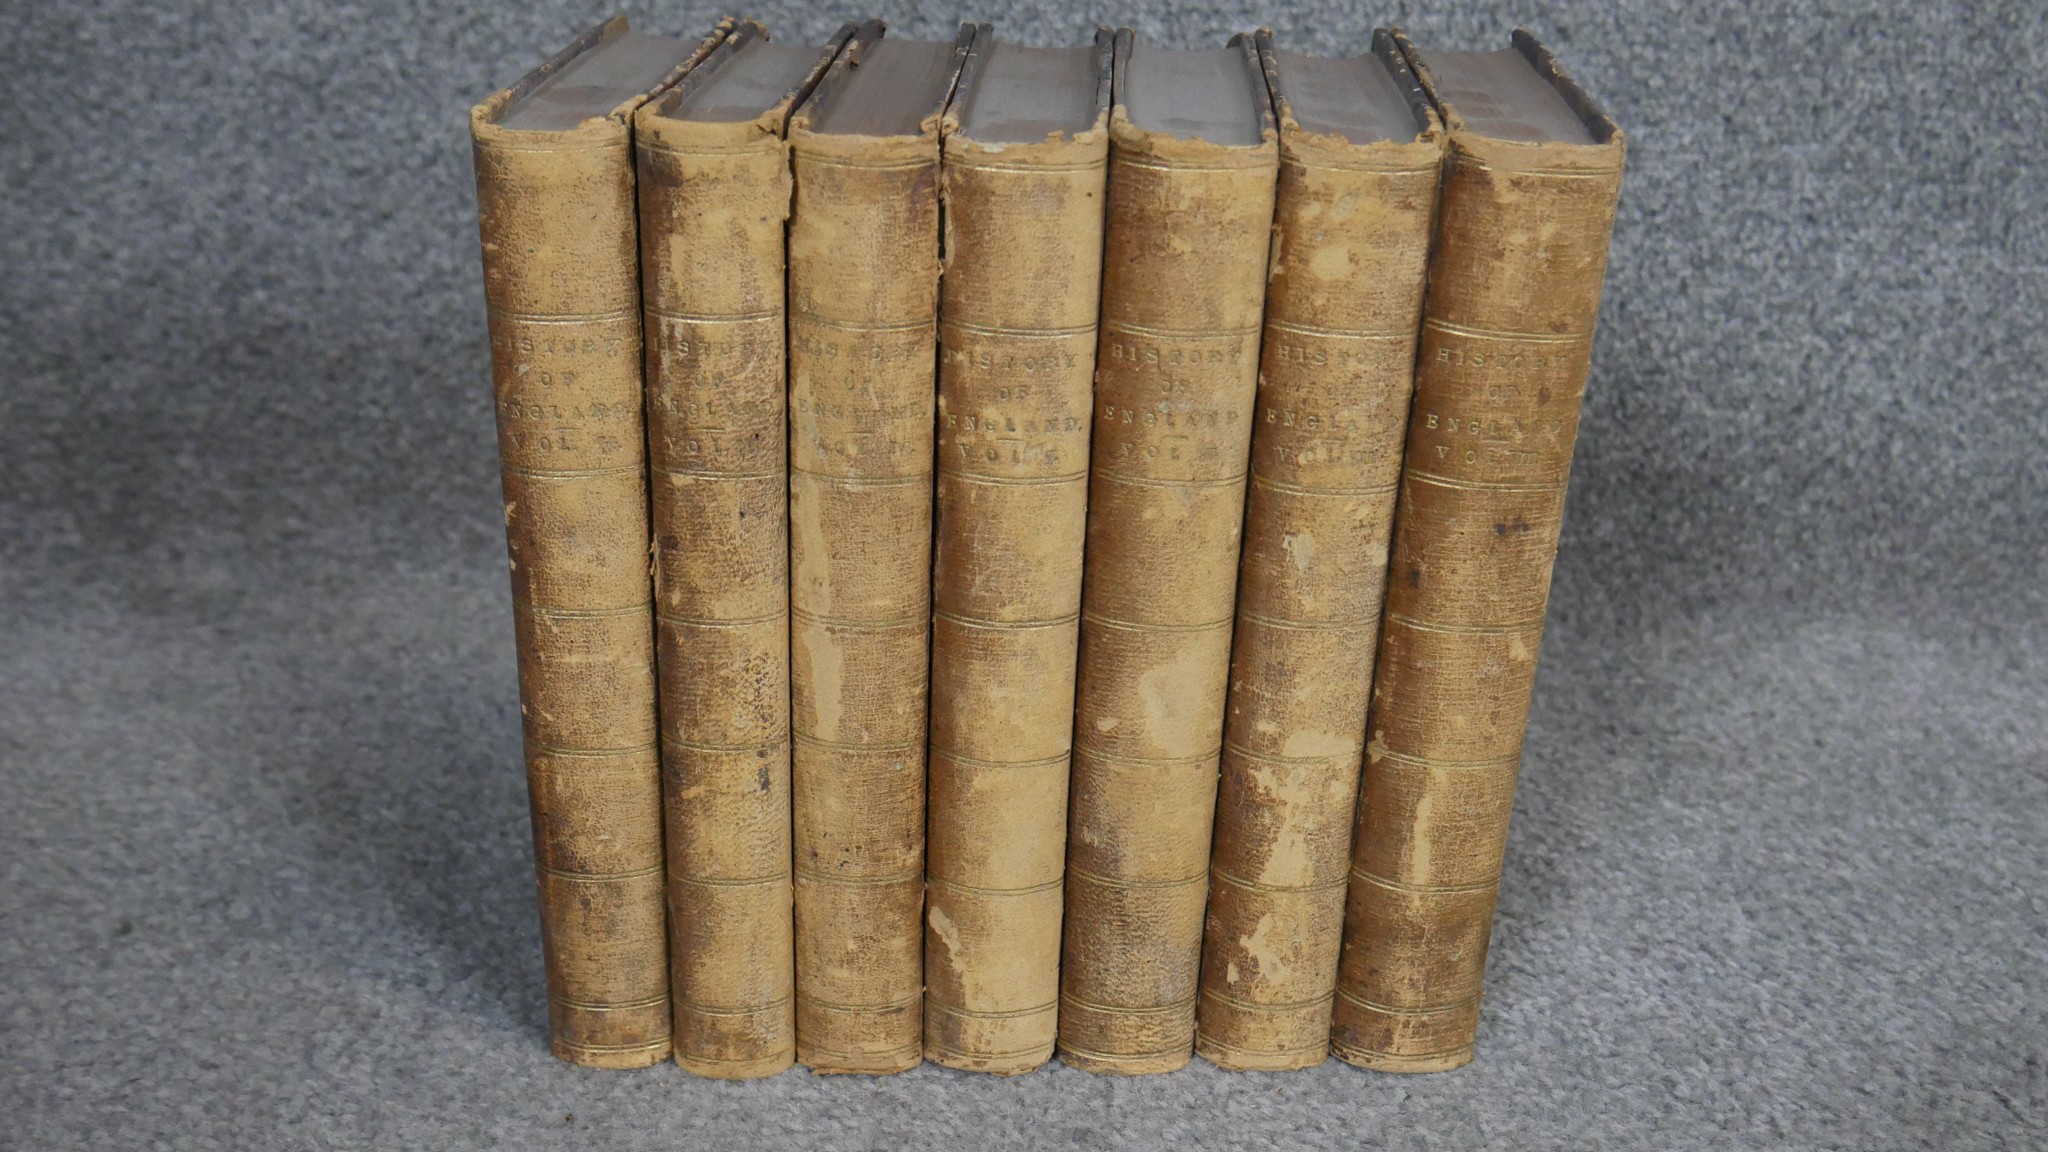 Hume, David The History of England. London, 1807, new edition, 7vo, 2-8. Retailers label in the